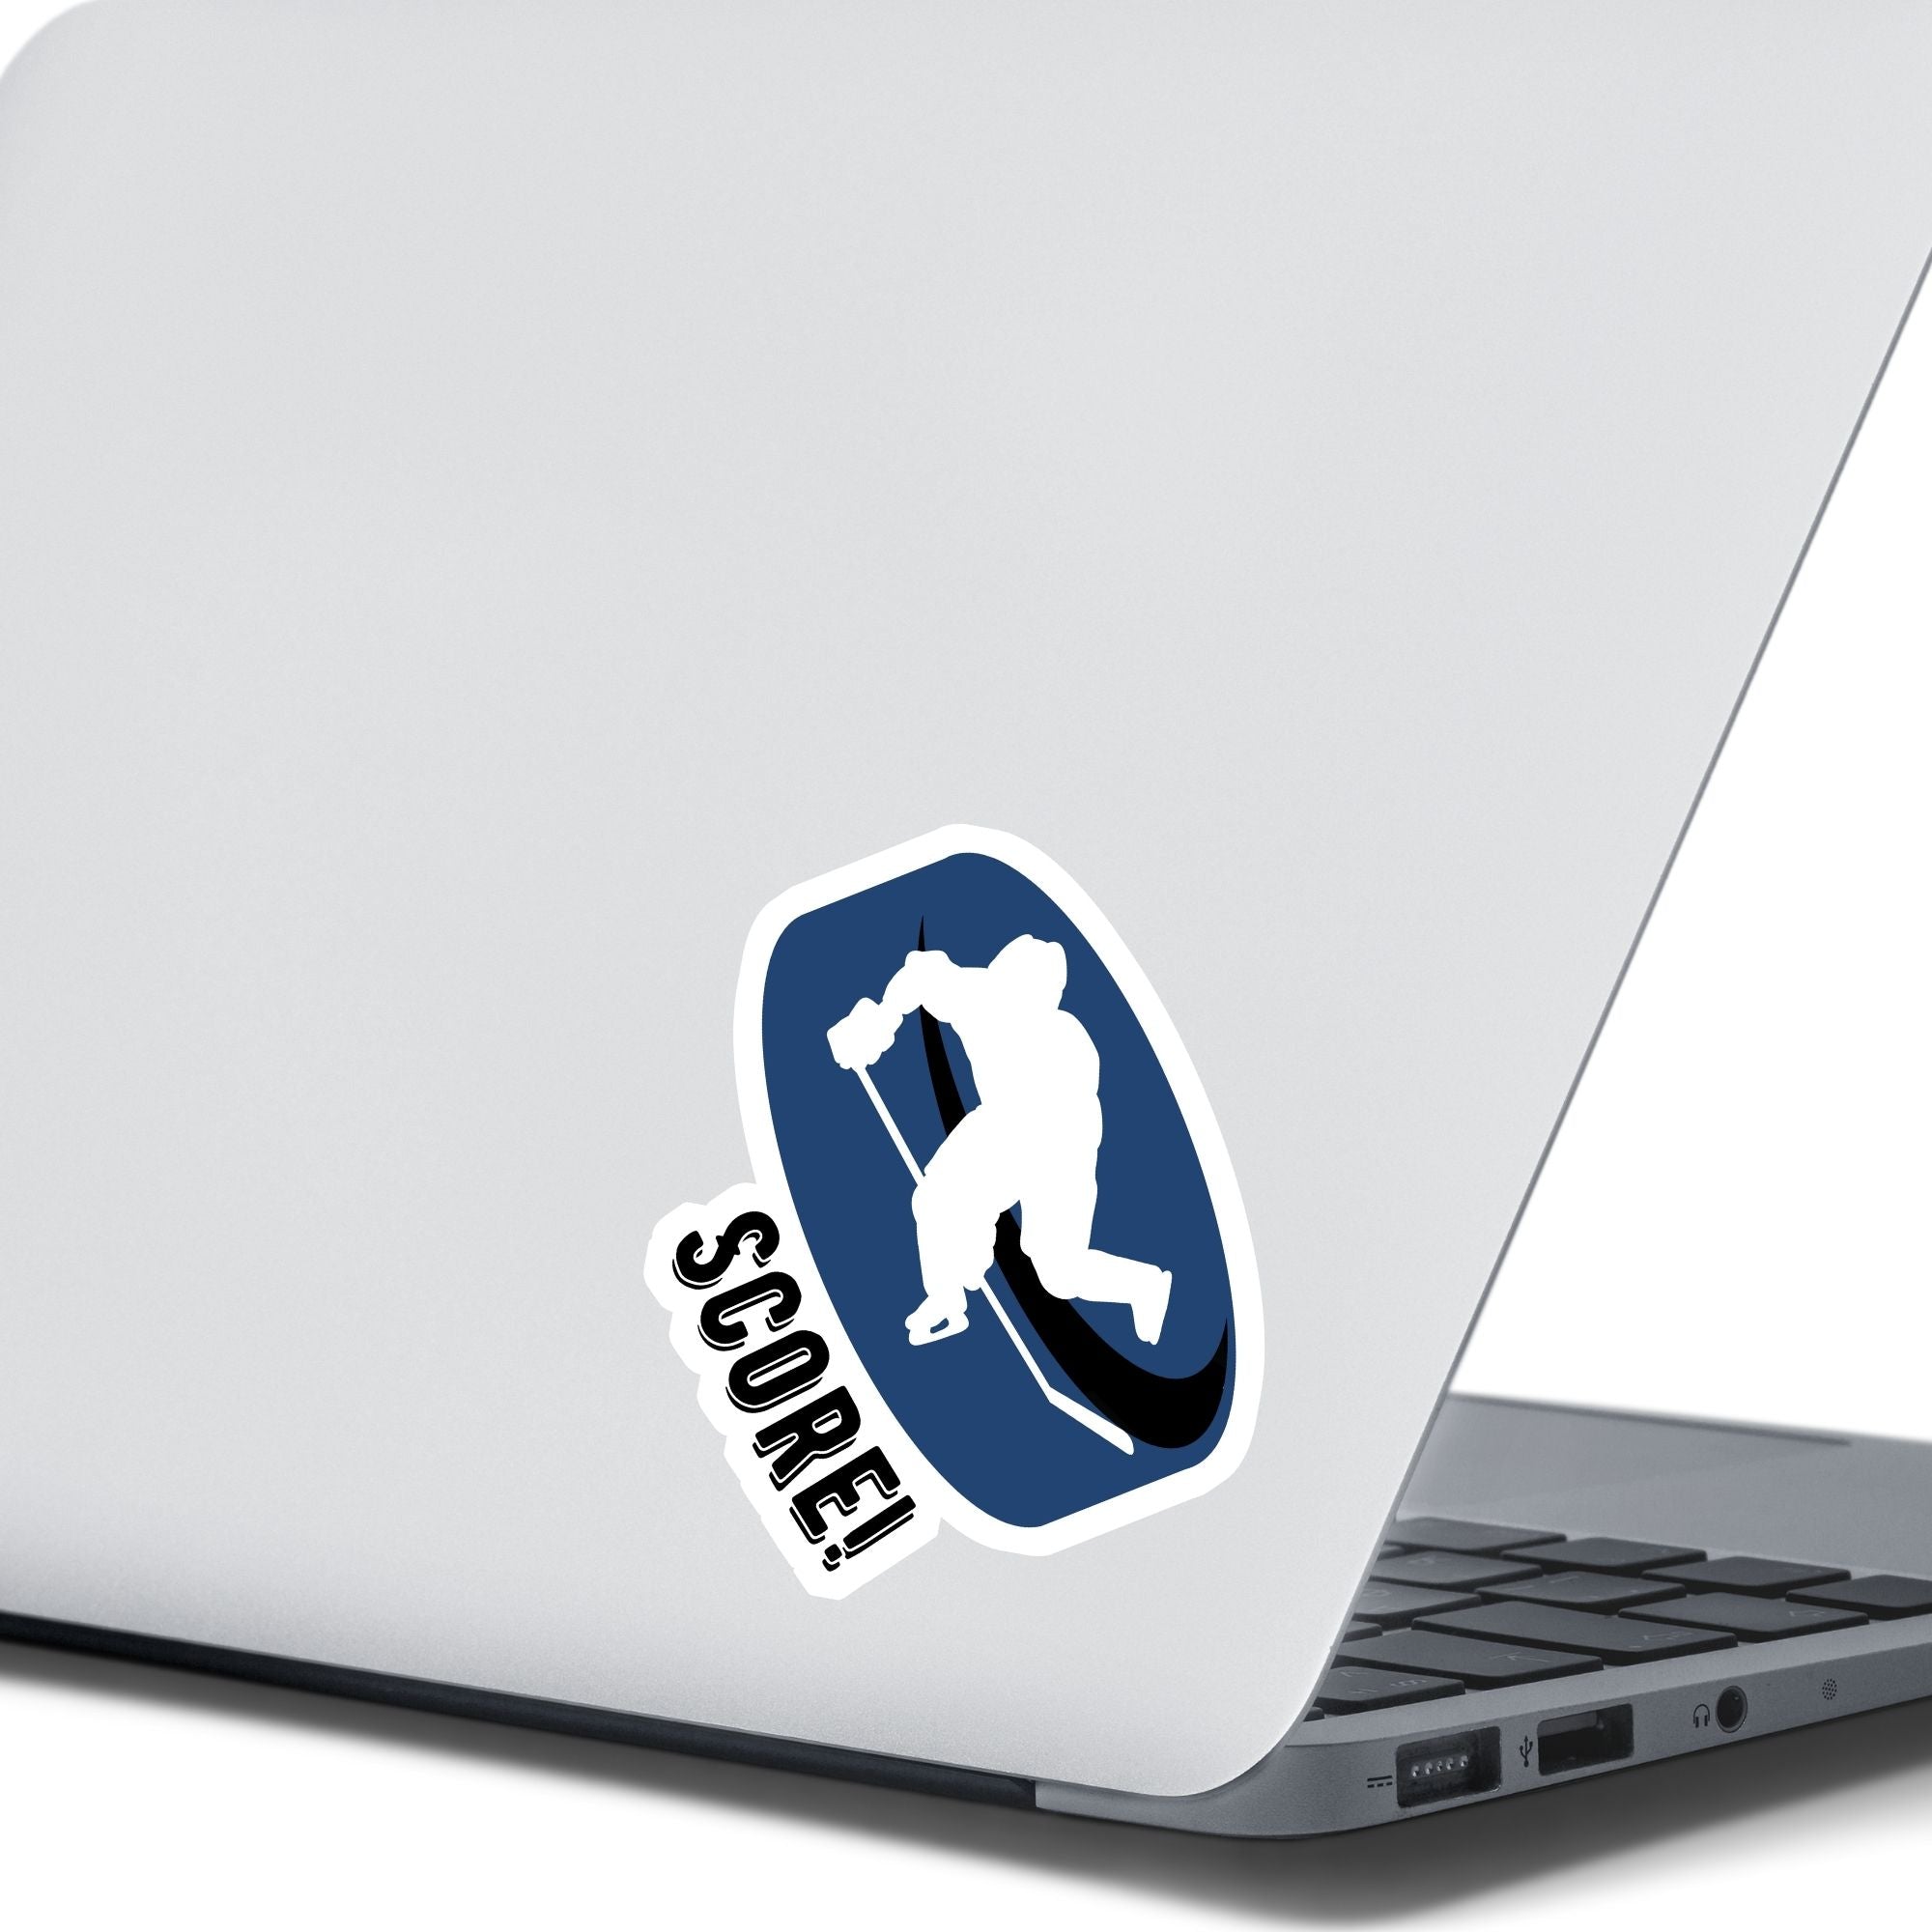 Grab your stick, lace up your skates, and head to the rink! This individual die-cut sticker features a hockey player silhouette on a blue hockey puck with the word "Score!" on the lower left side. This image shows the hockey sticker on the back of an open laptop.